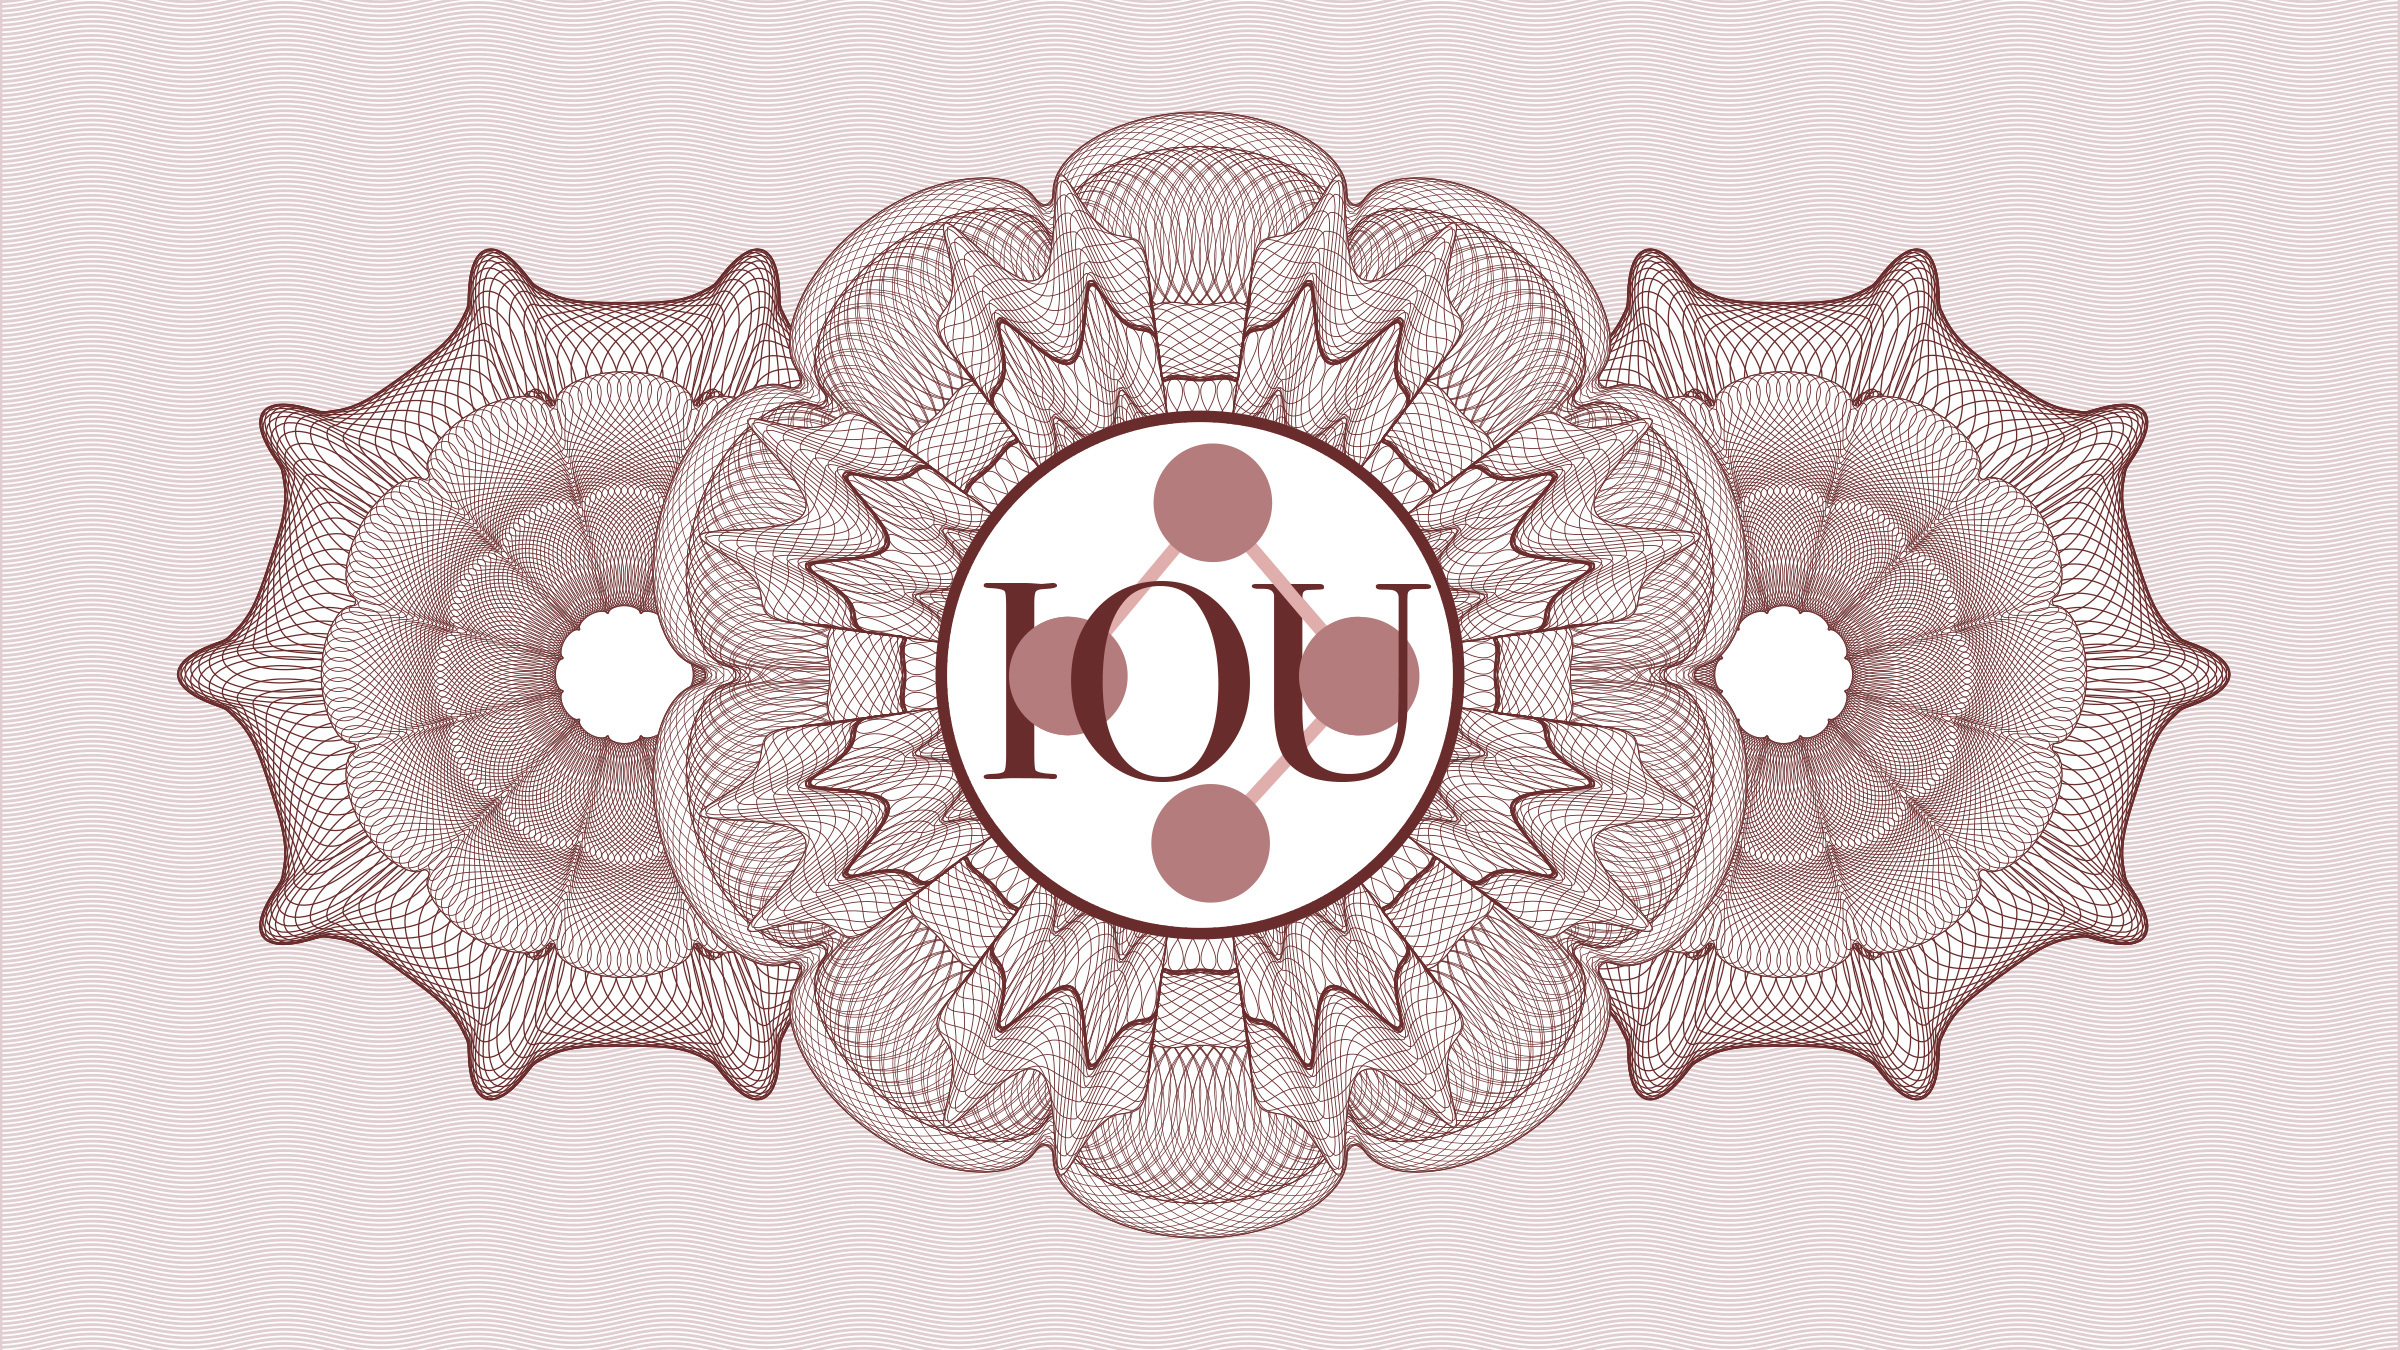 'IOU' on official-looking seal